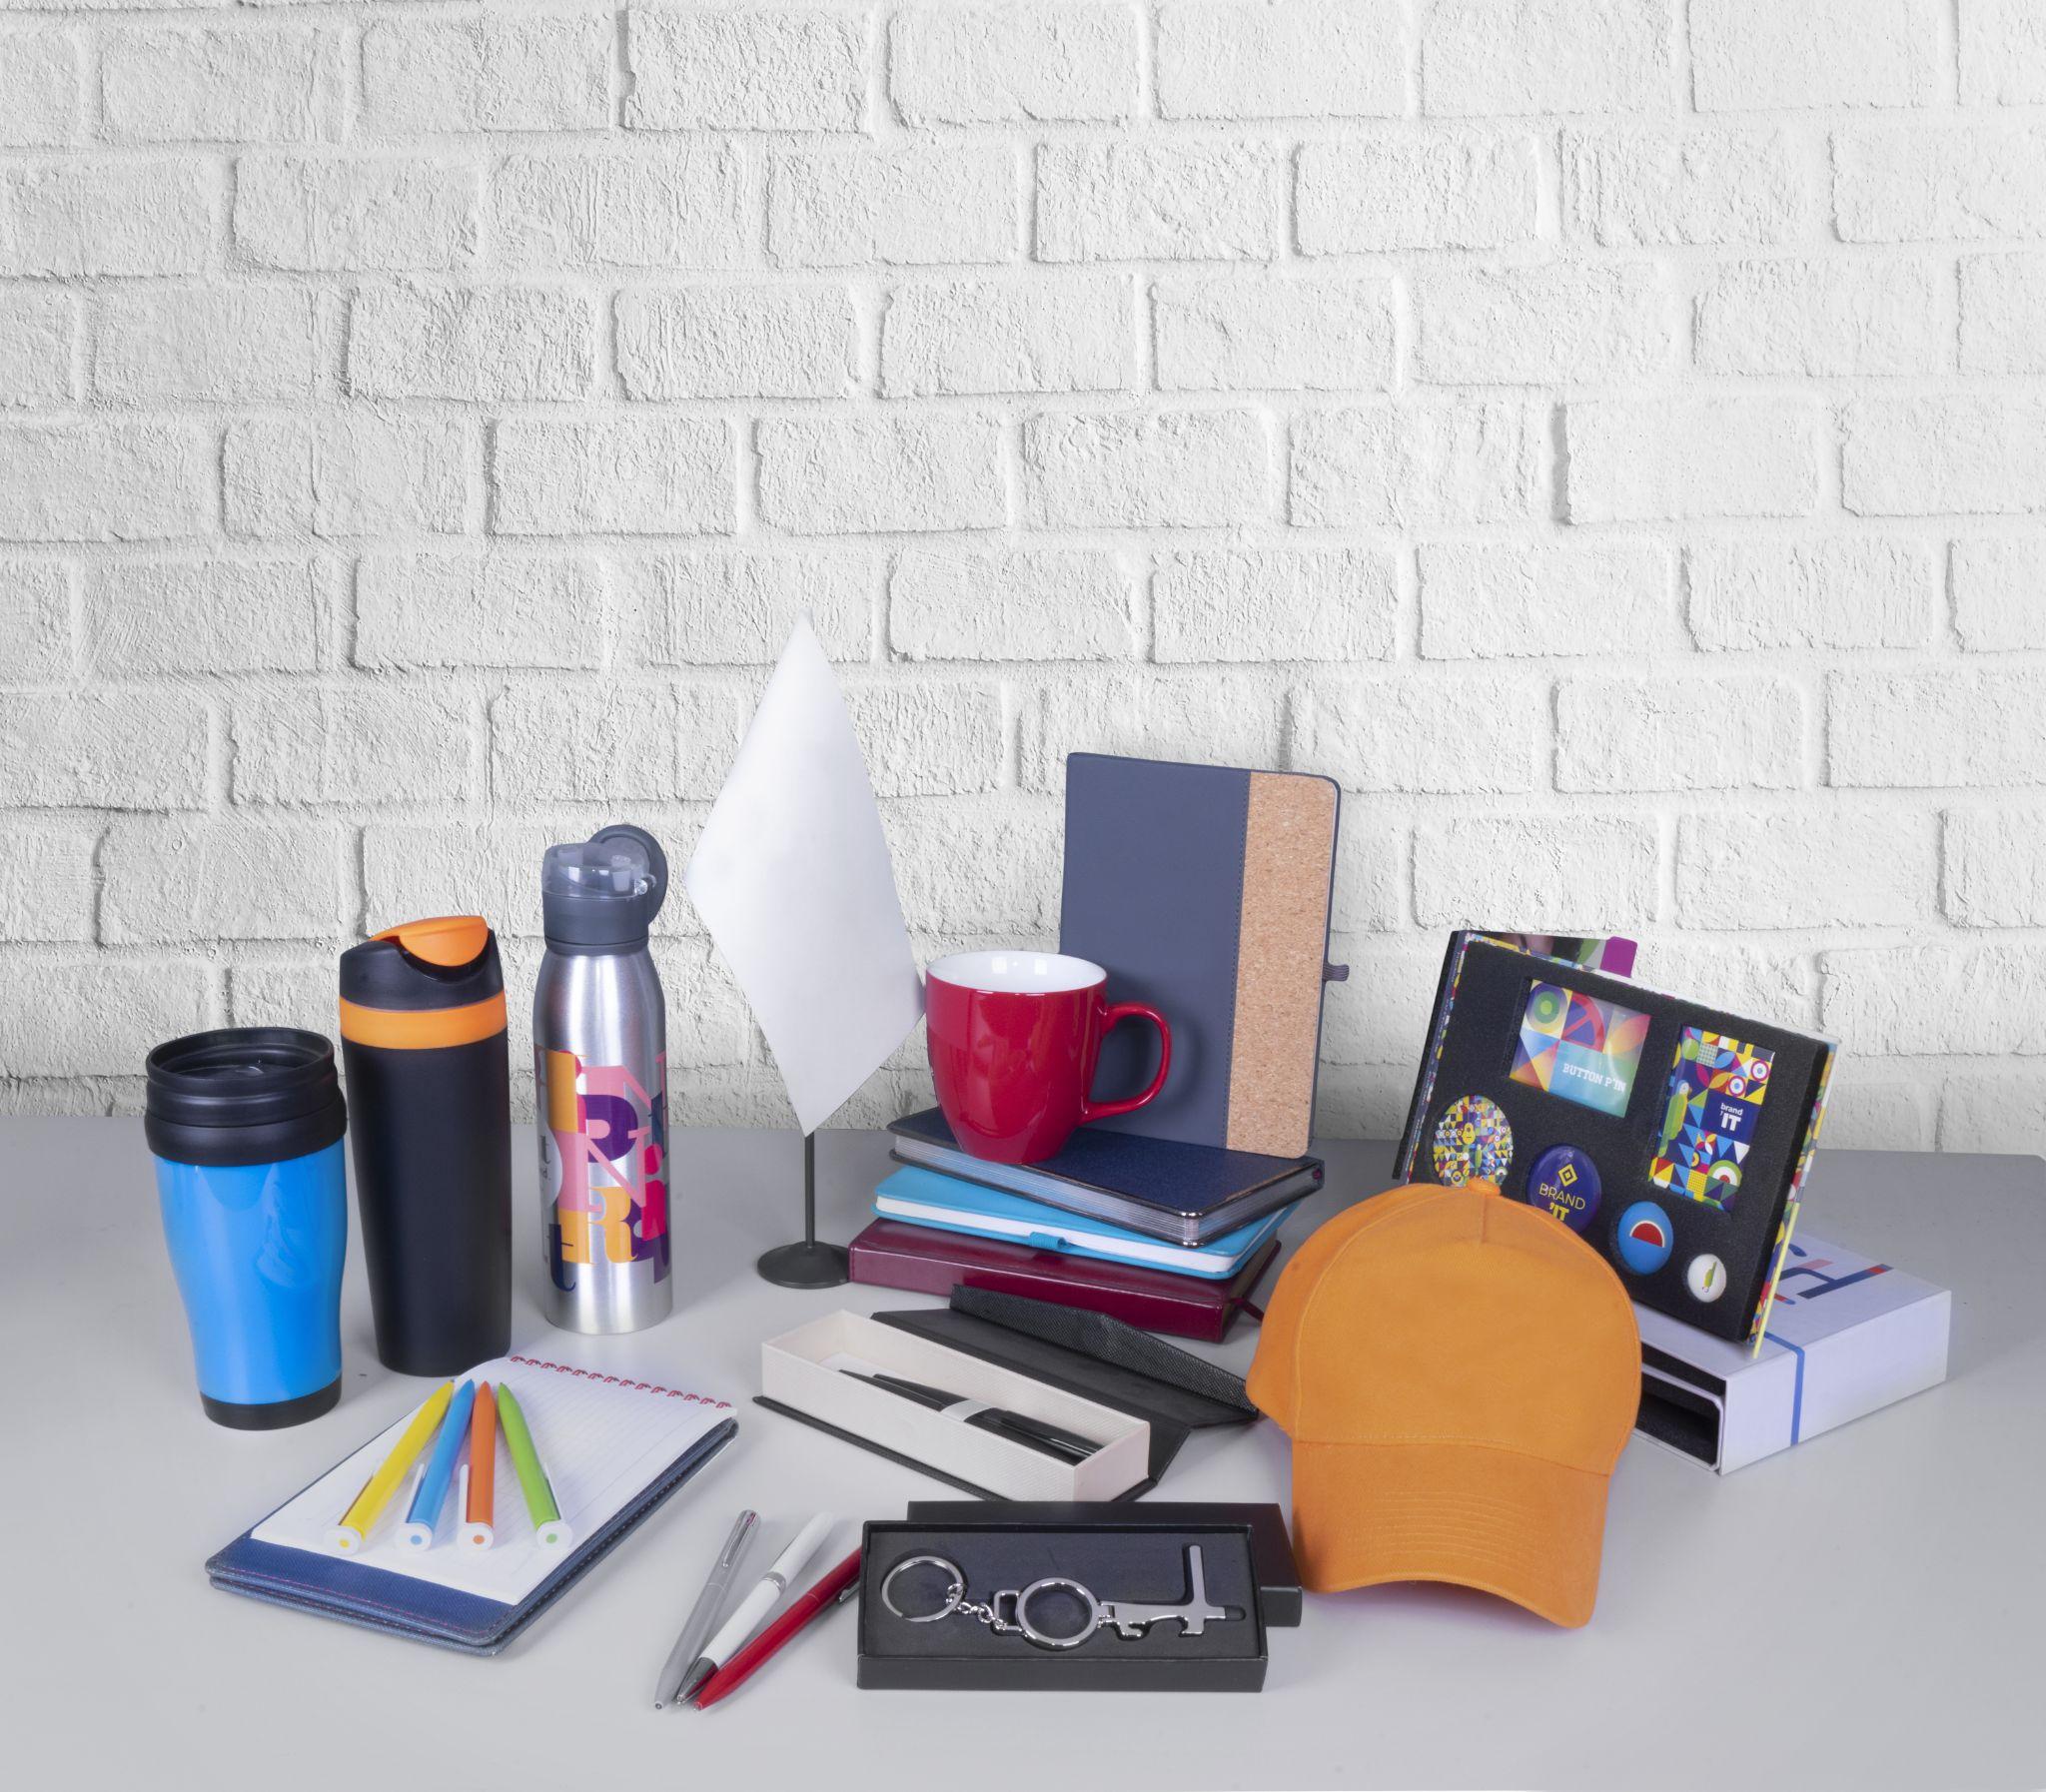 Composition of different promo products - Thermo mug, mug, gifts, pens in boxes, notebooks, tools, cap,flag table.